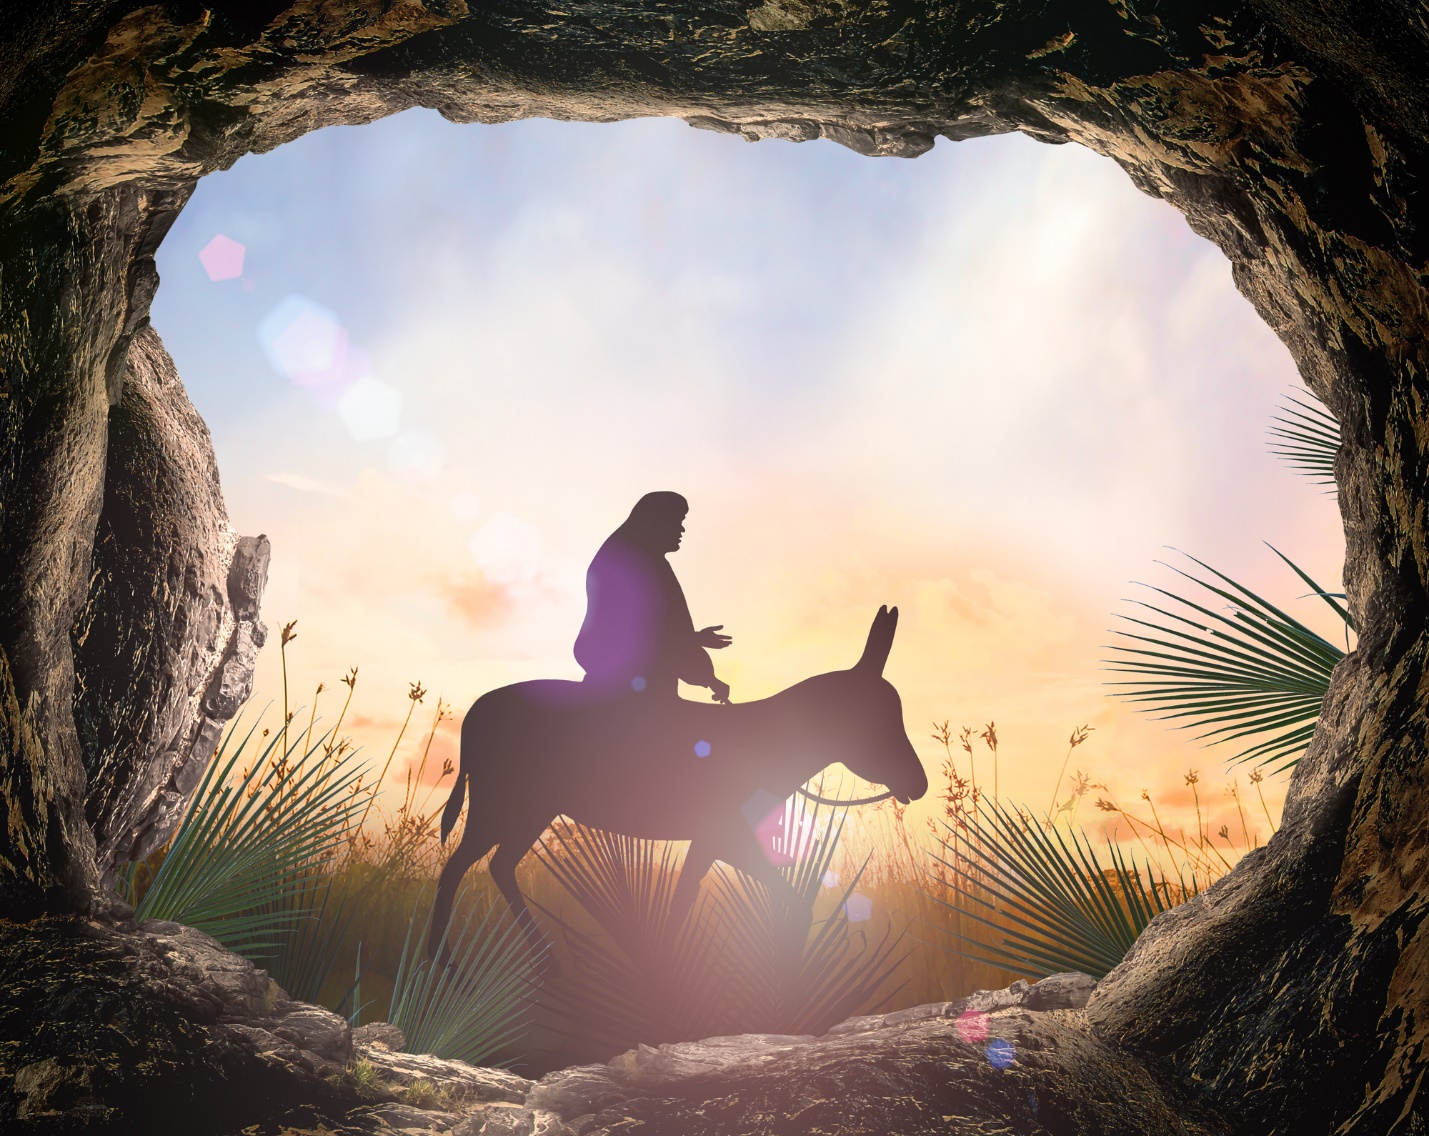 A person riding a donkey through a cave

Description automatically generated